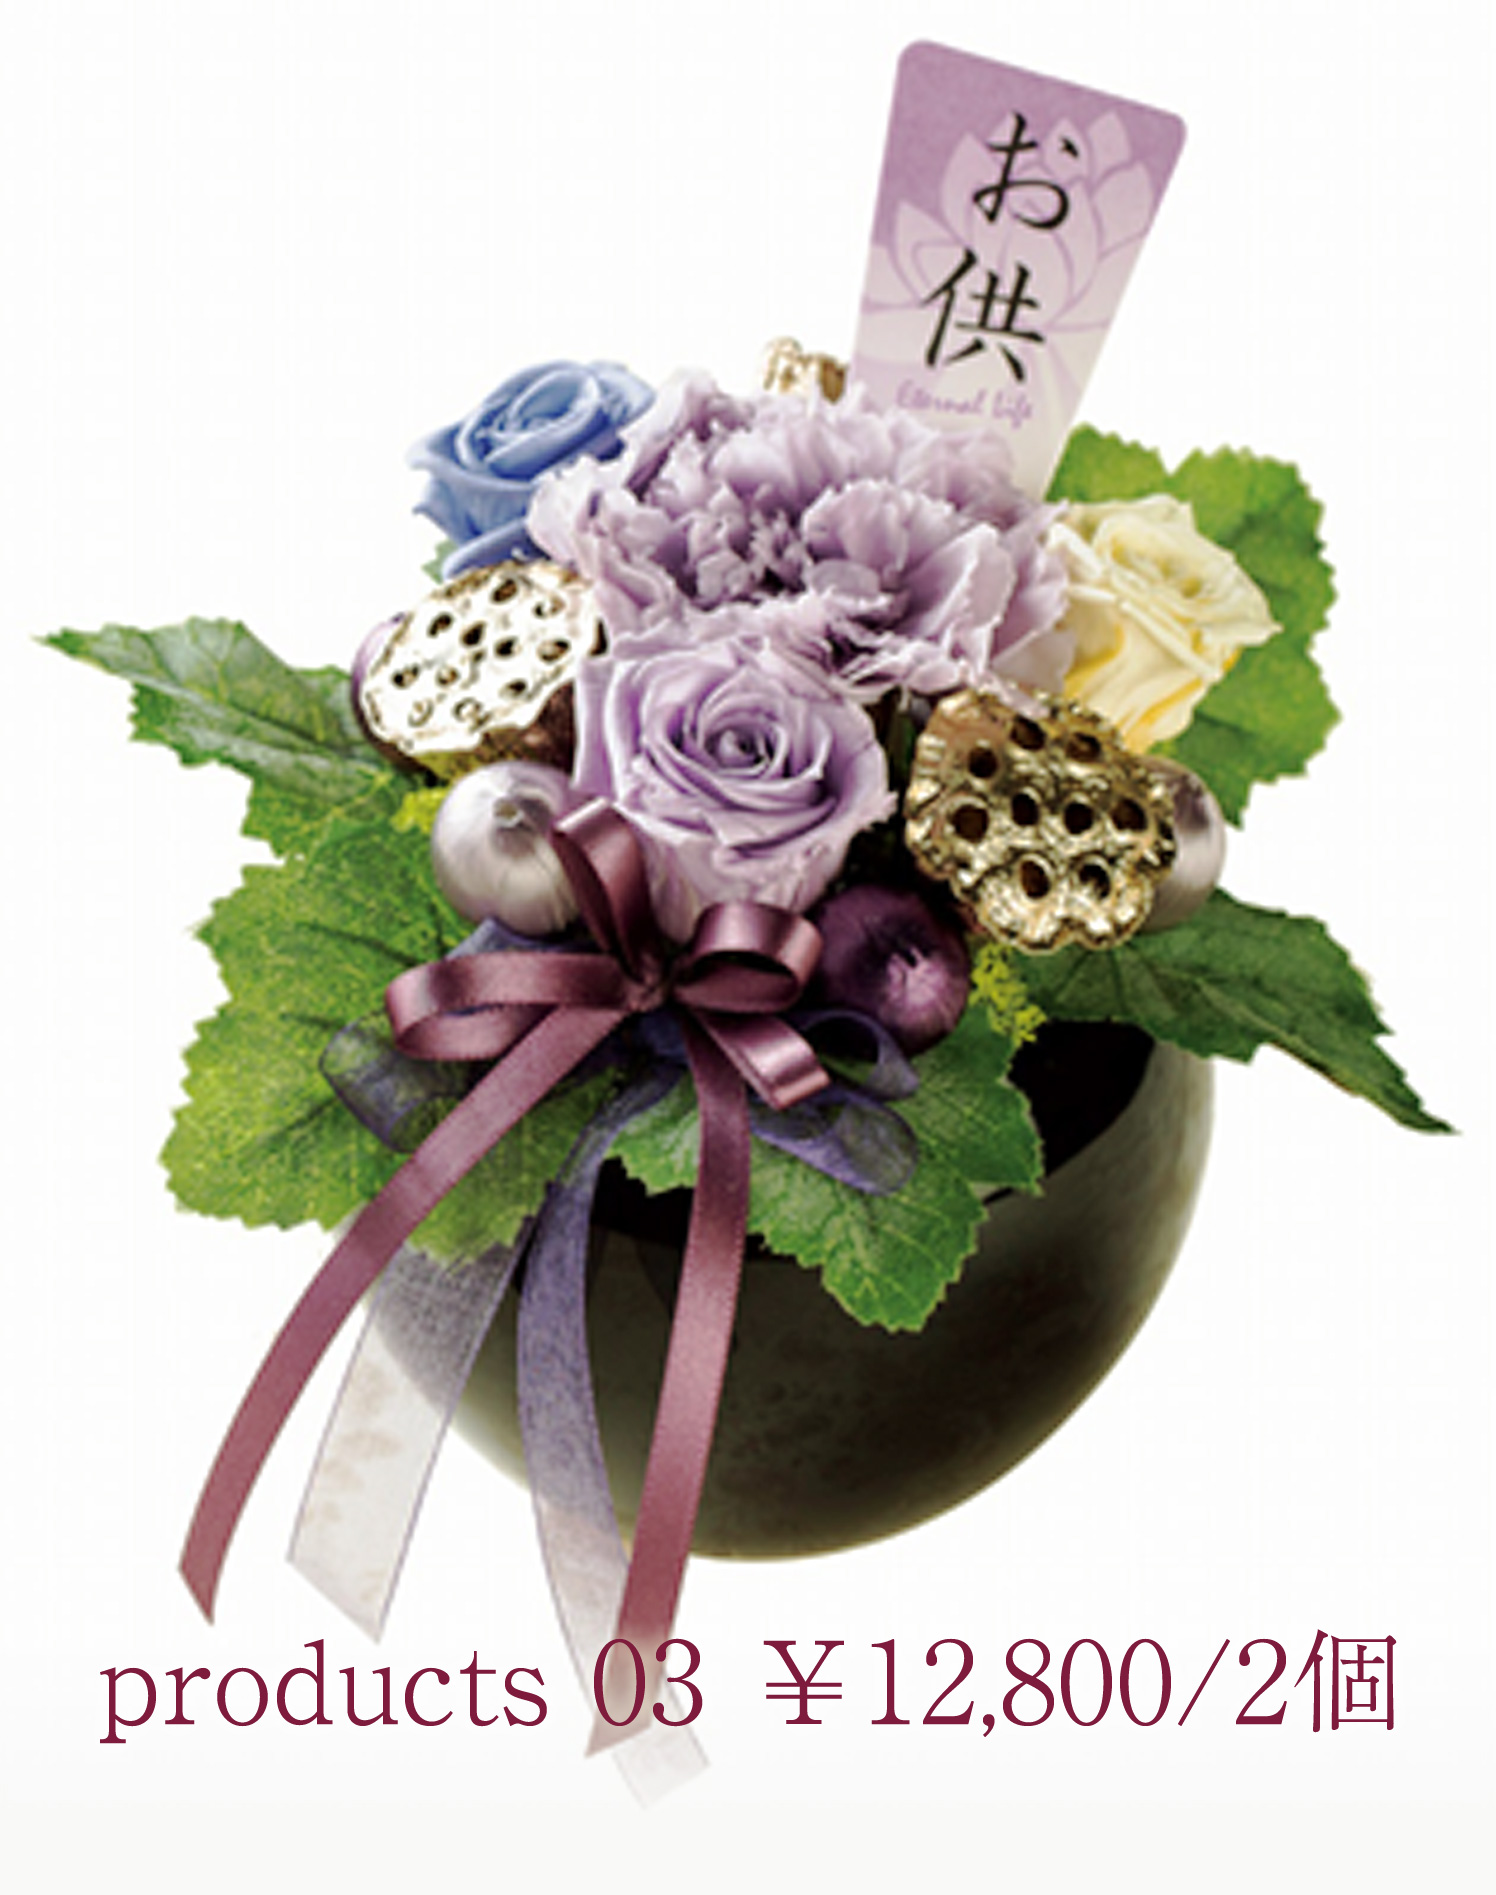 products 03